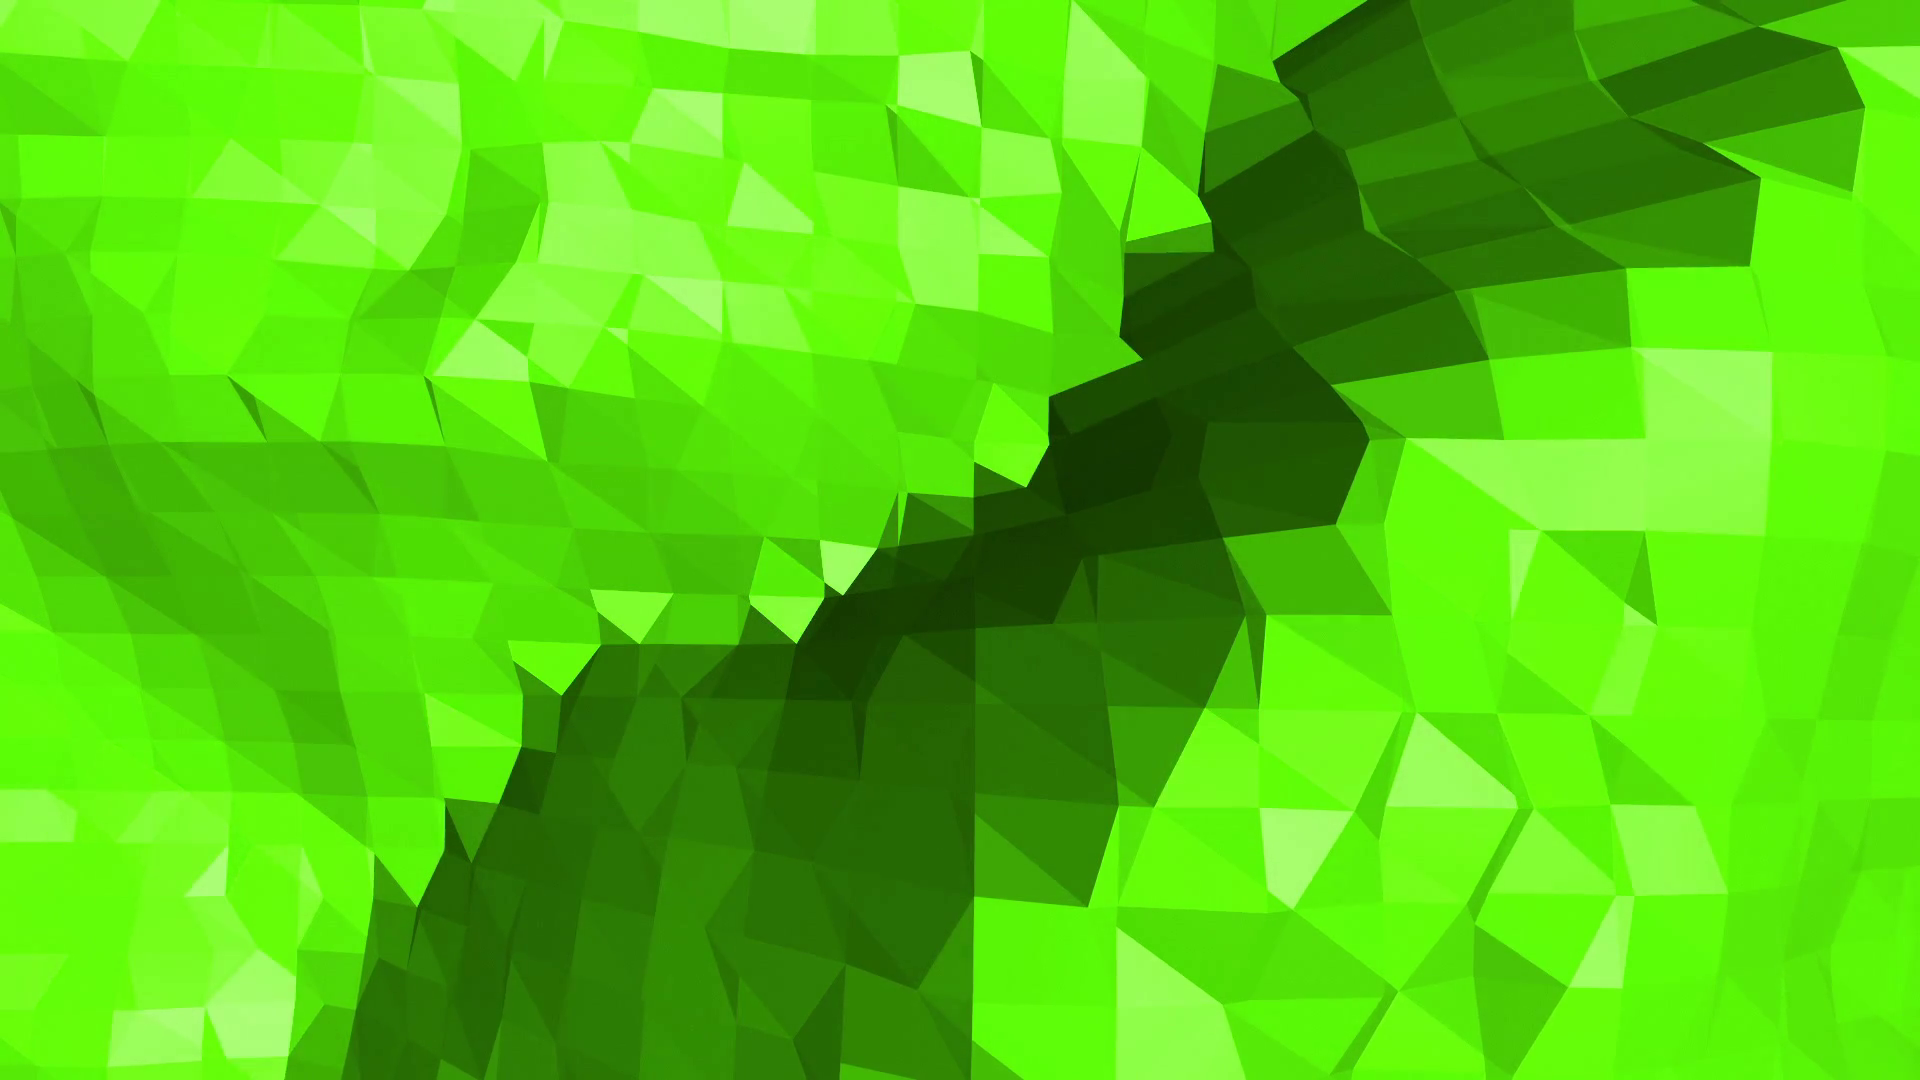 Green low poly background pulsating. Abstract low poly surface as ...